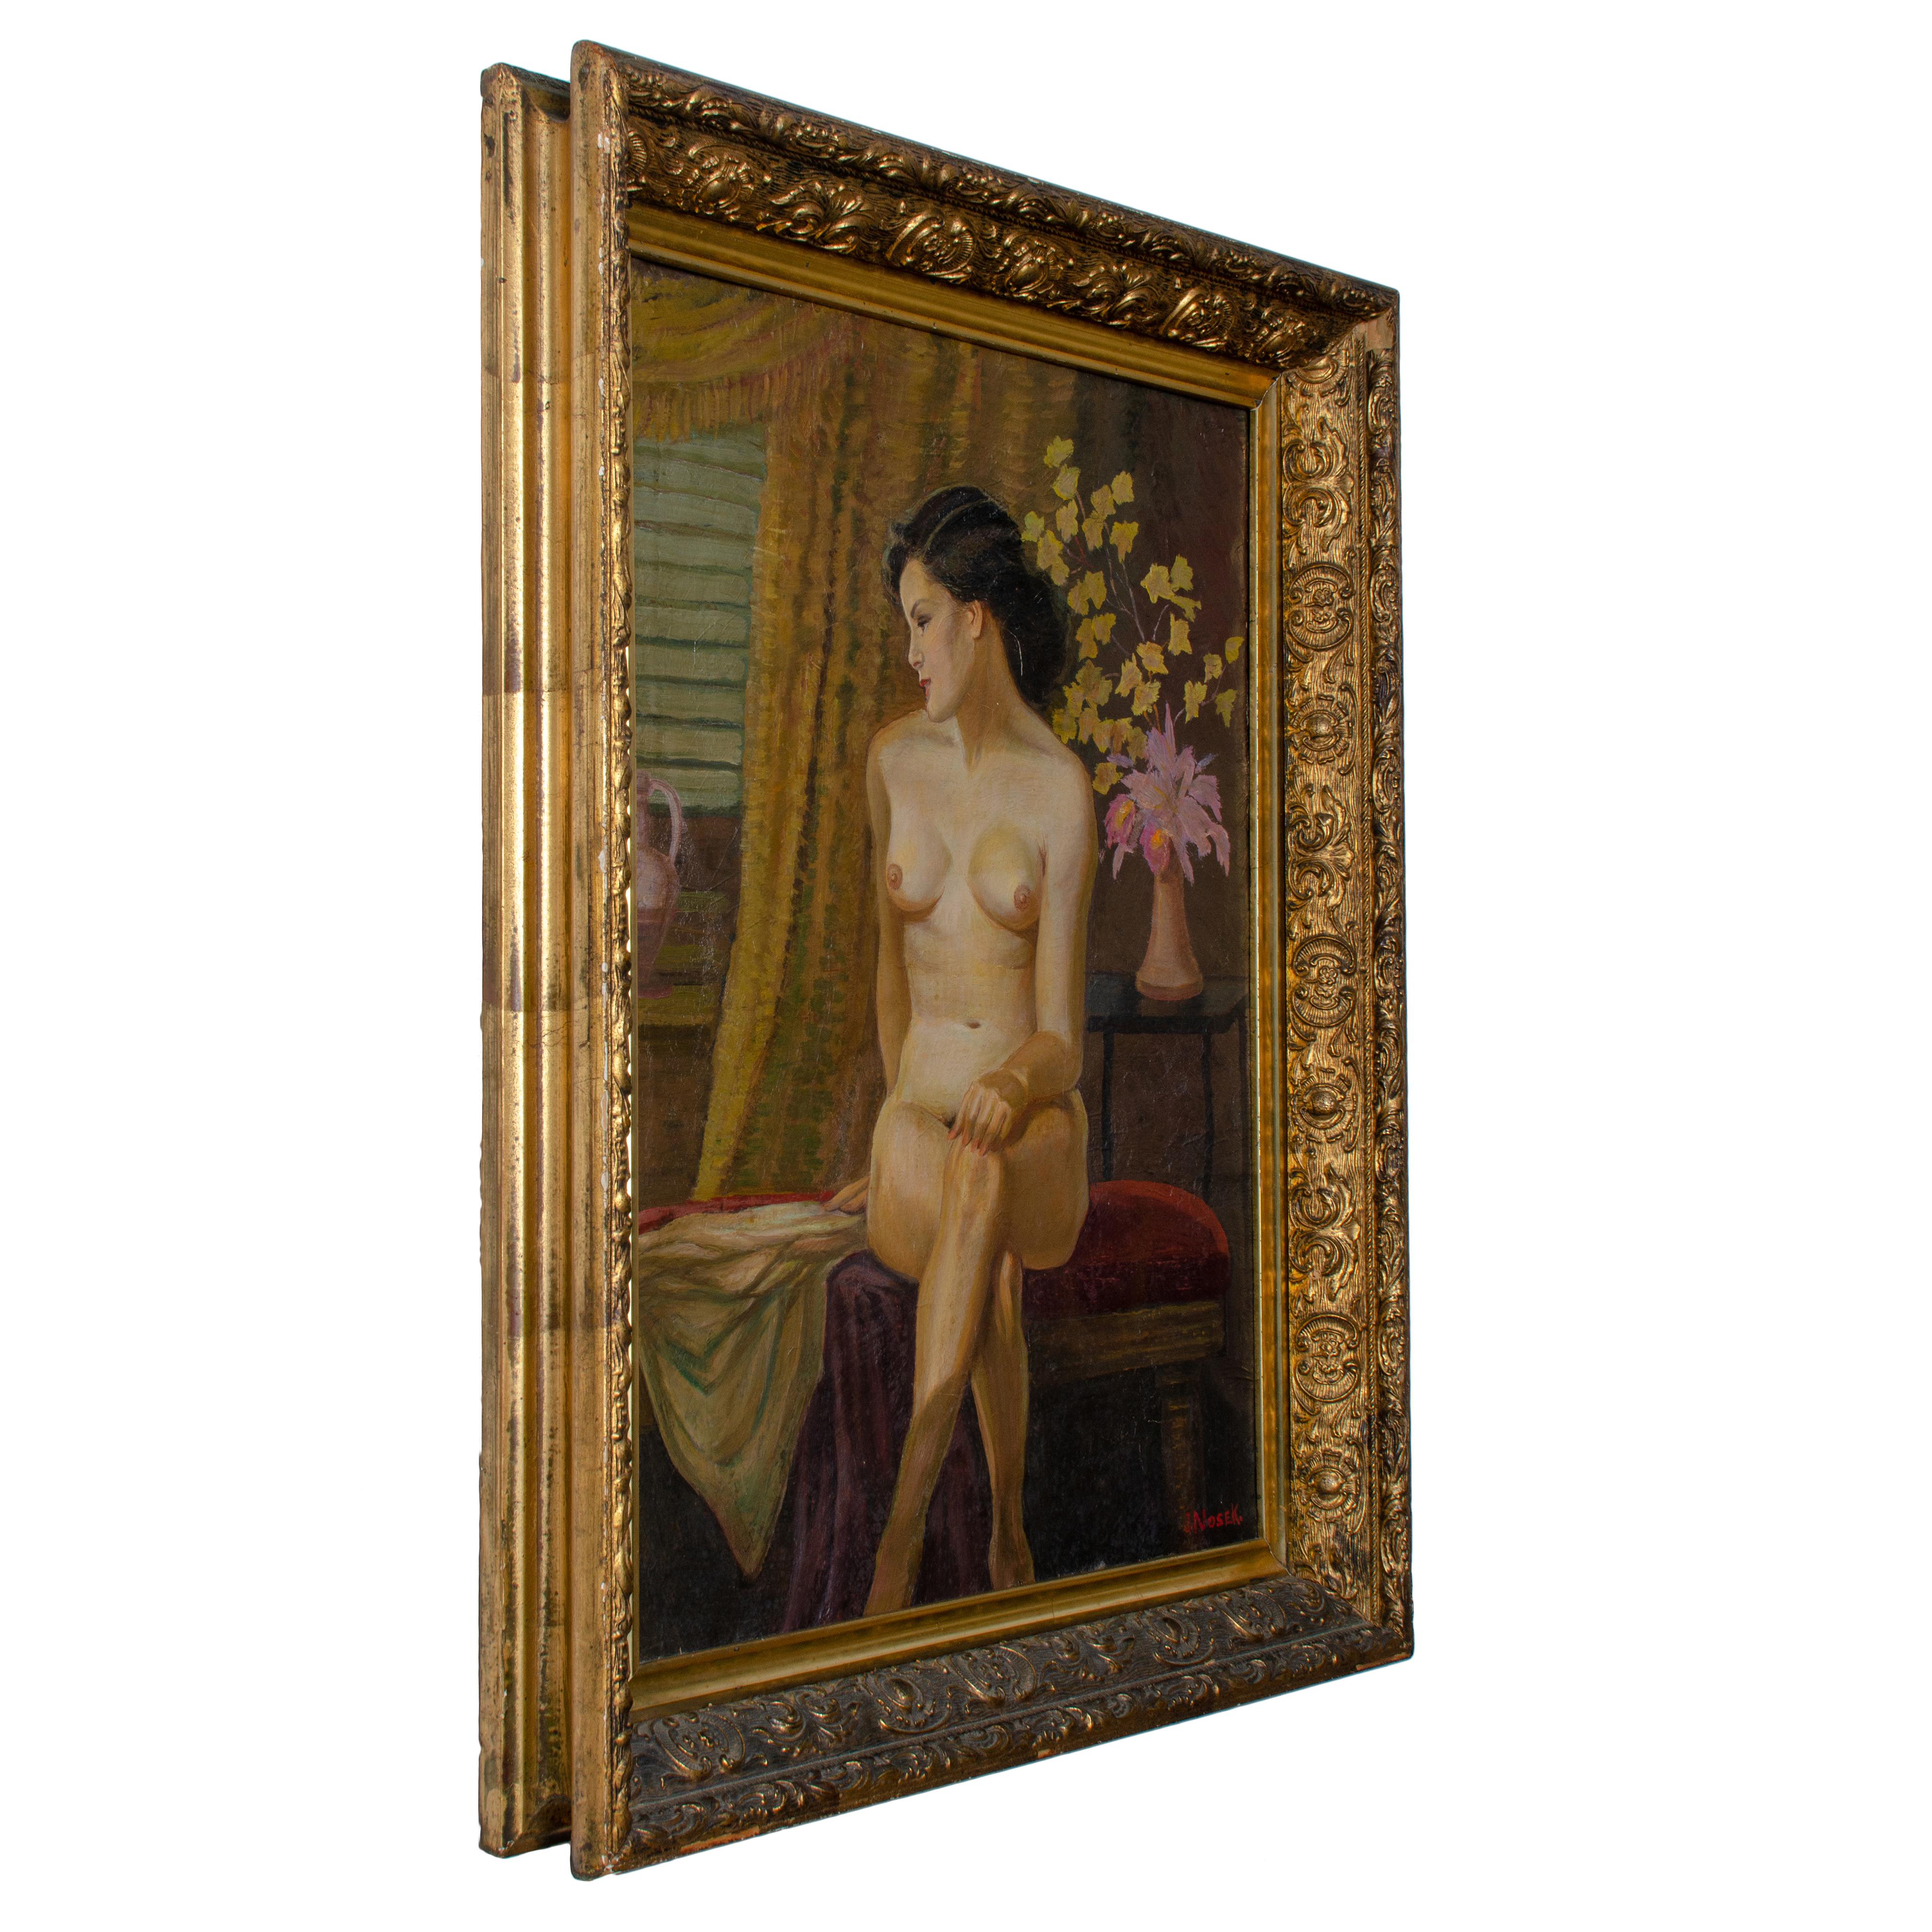 Canvas Jan Nosek Nude Painting, c. Mid-20th Century For Sale